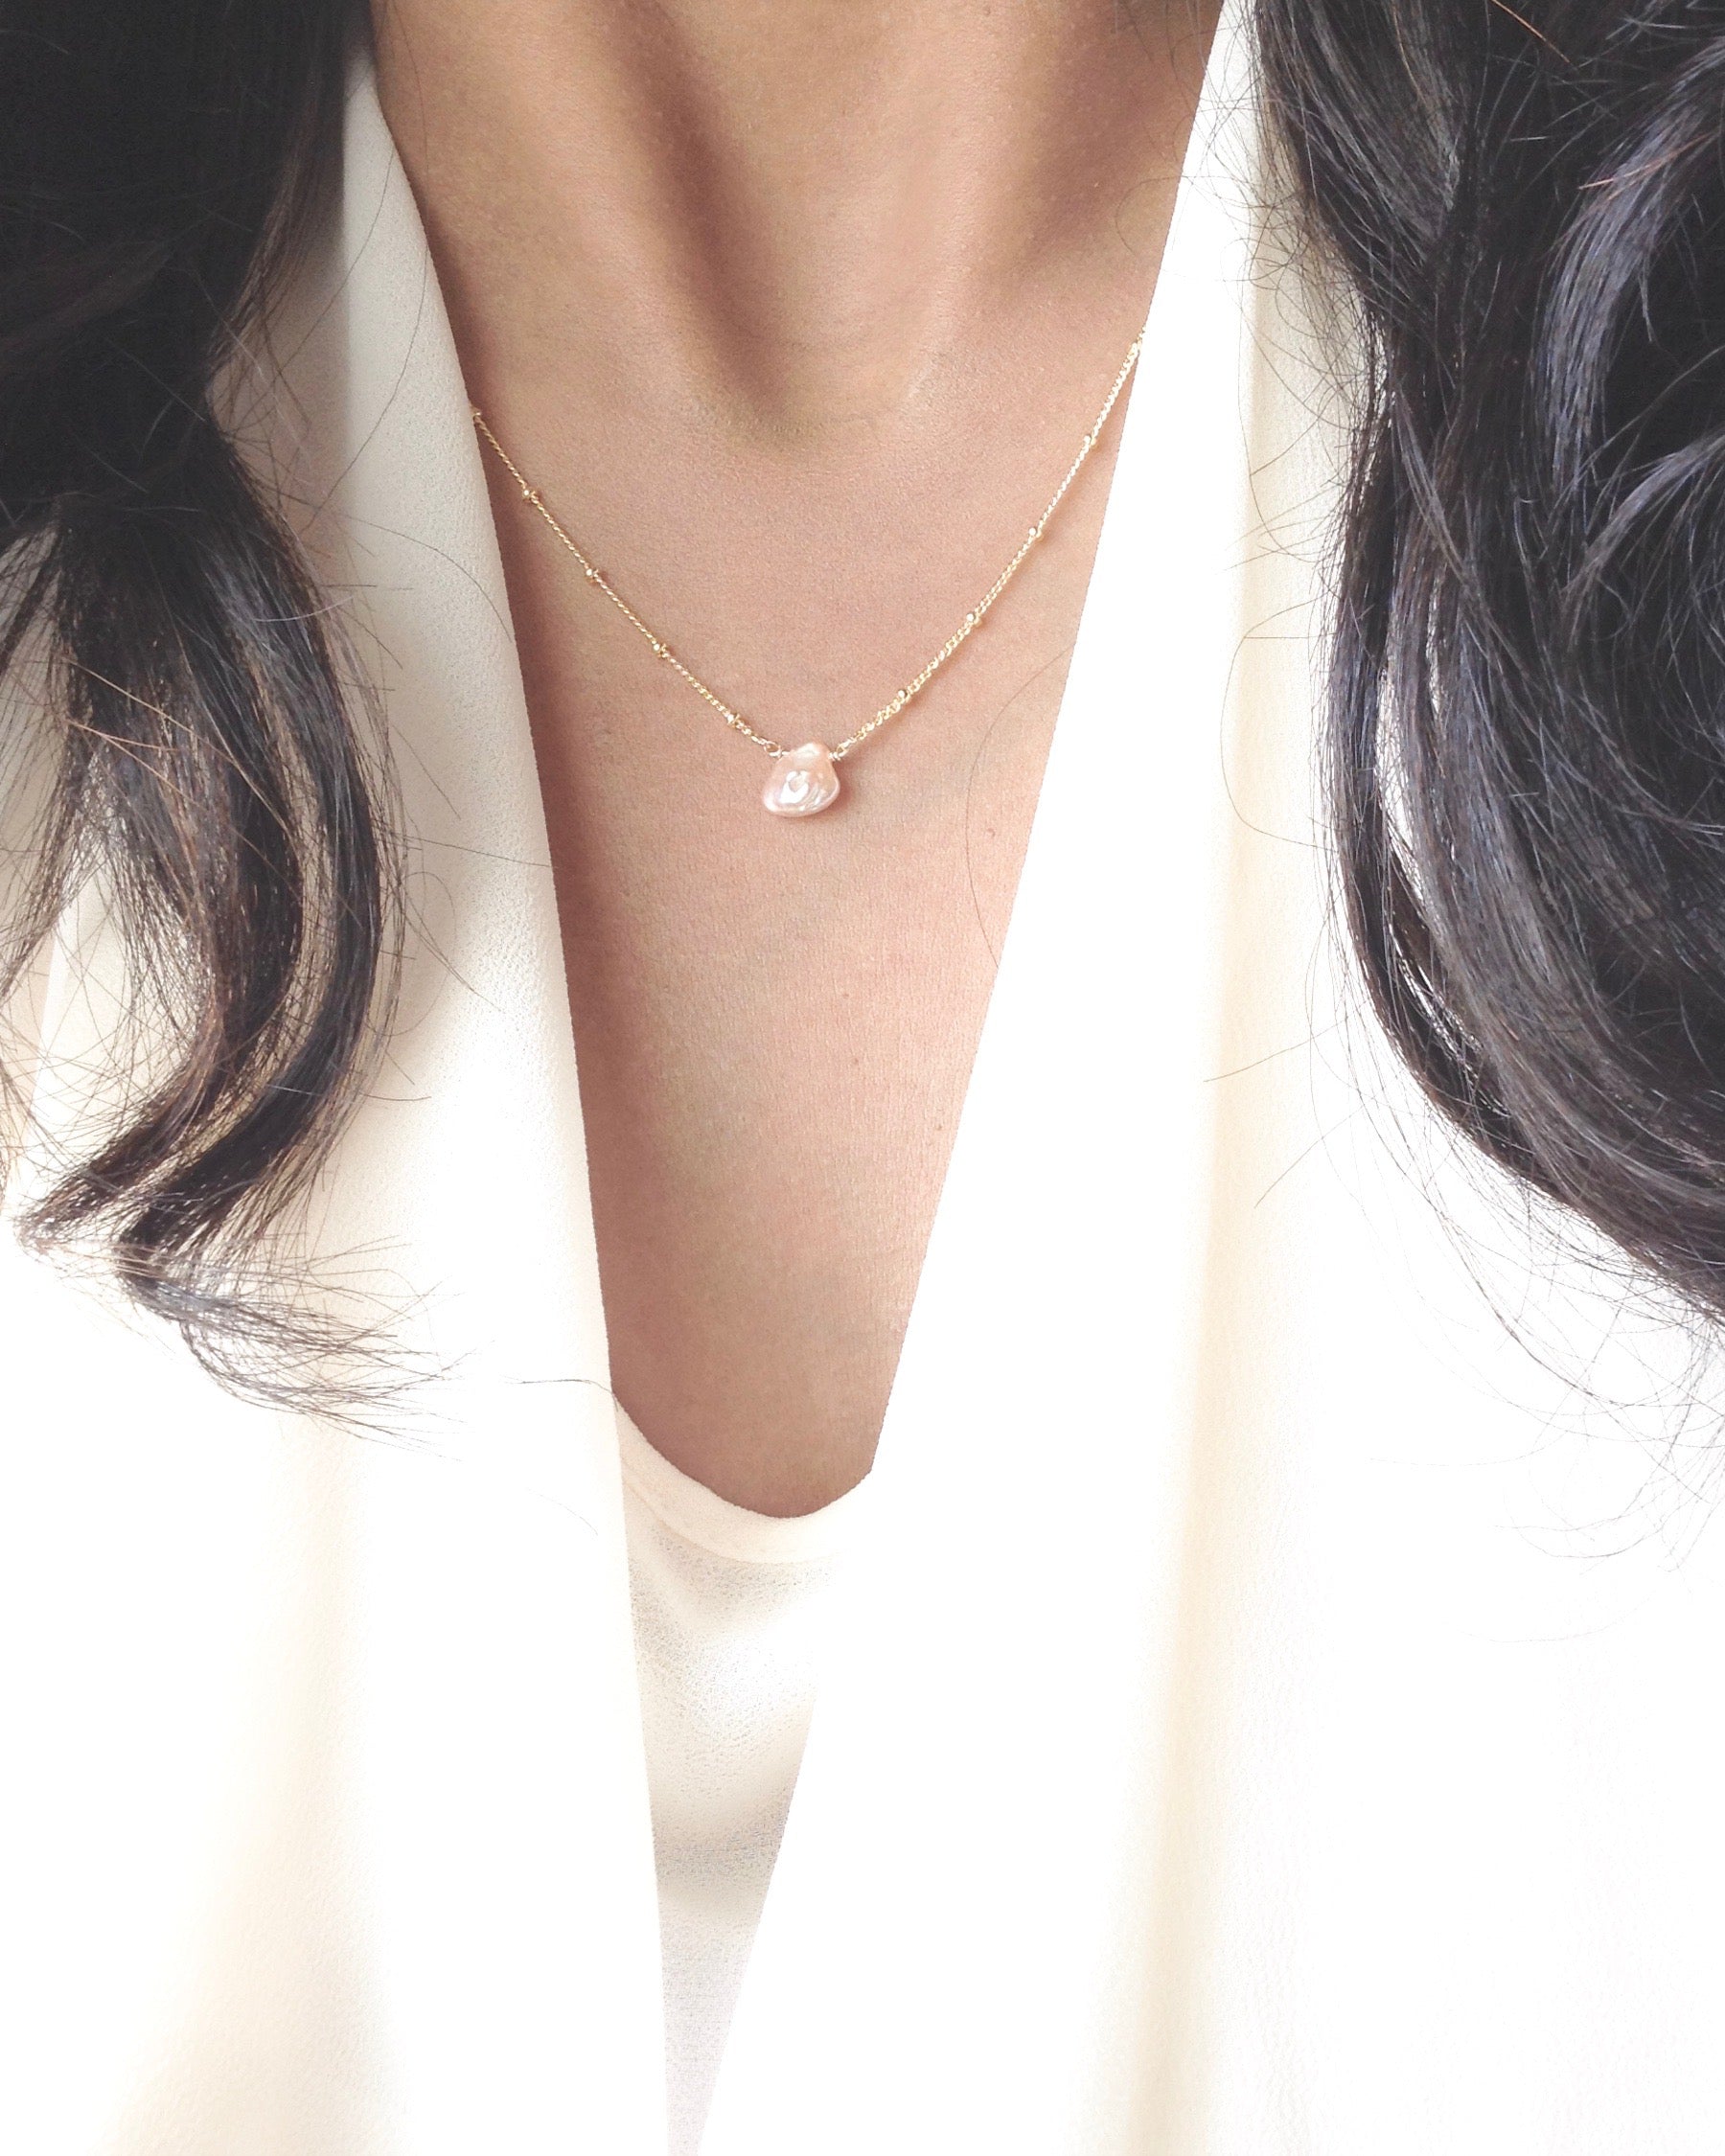 Keshi Pearl Satellite Chain Necklace in Gold Filled or Sterling Silver | IB Jewelry